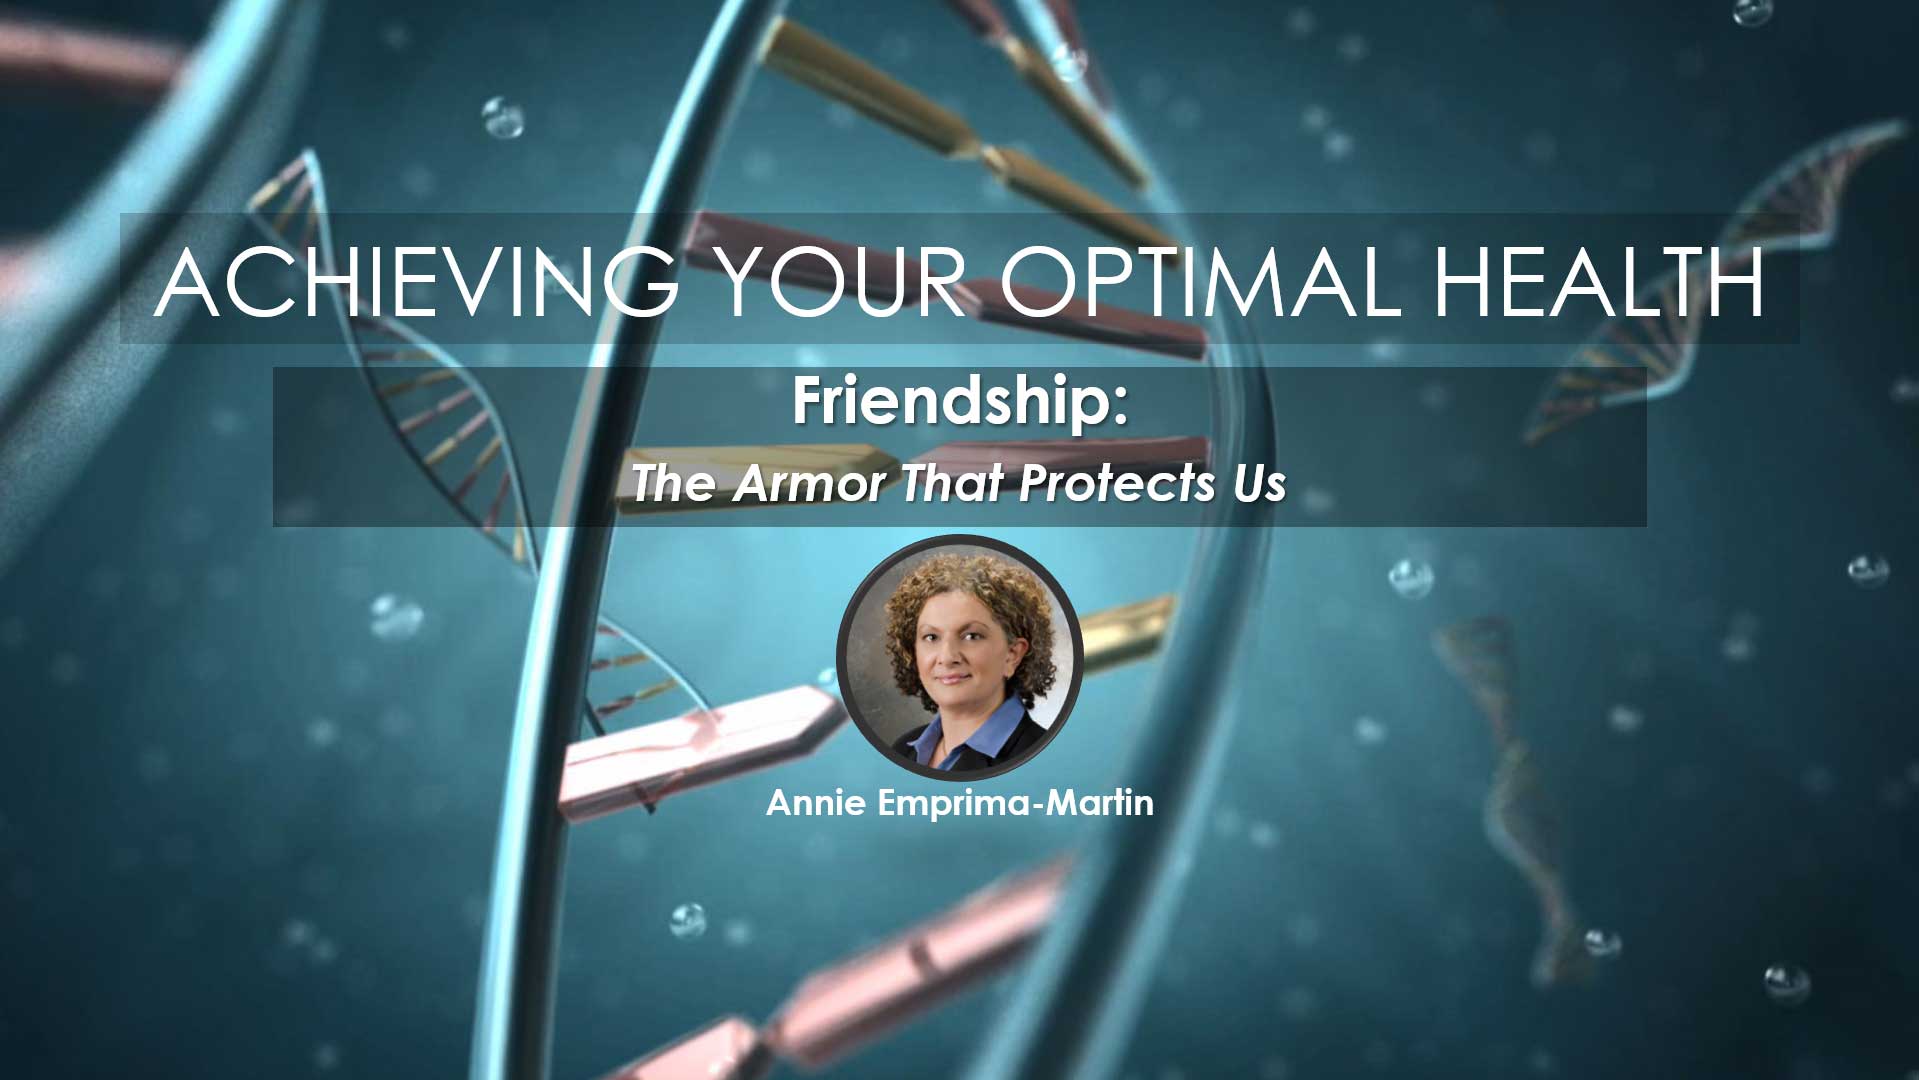 Friendship: The Armor That Protects Us | Annie Emprima-Martin for Webinar Series "Achieving Your Optimal Health"